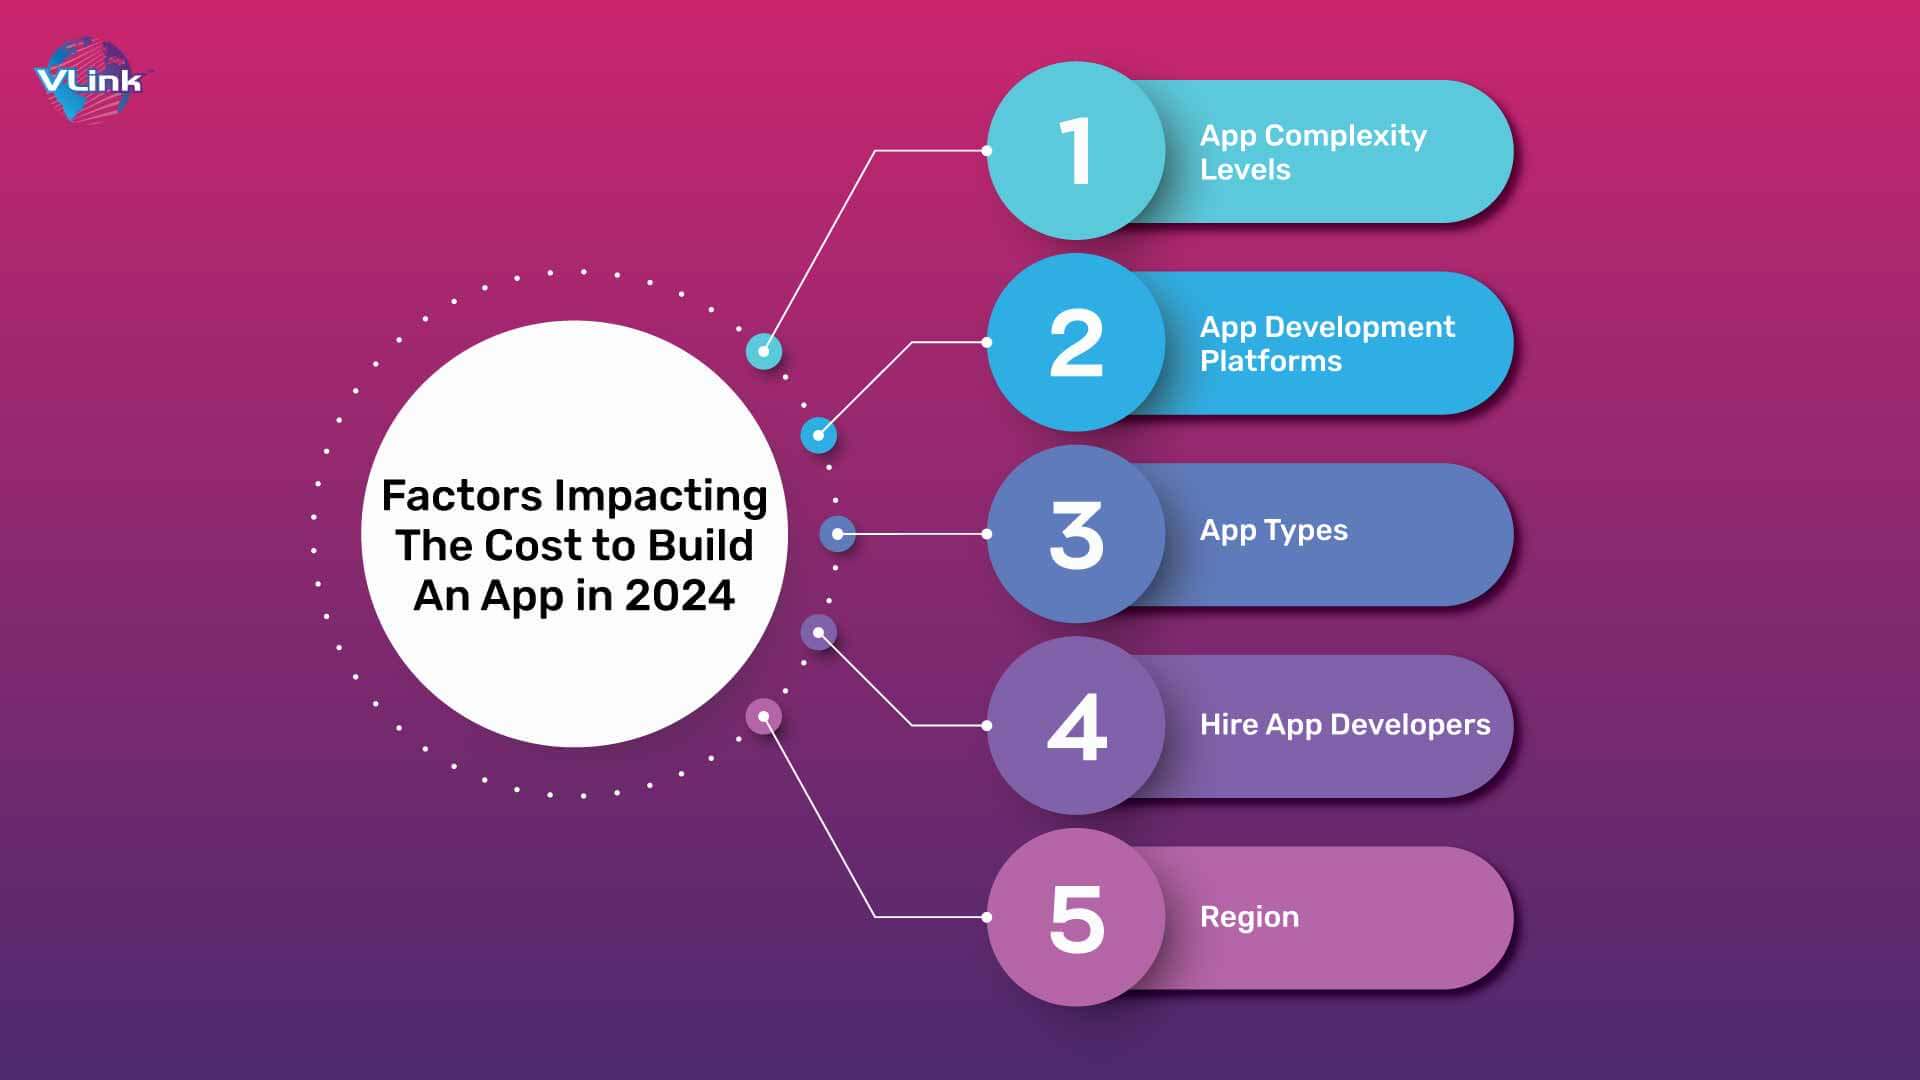 Factors Impacting The Cost to Build An App in 2024